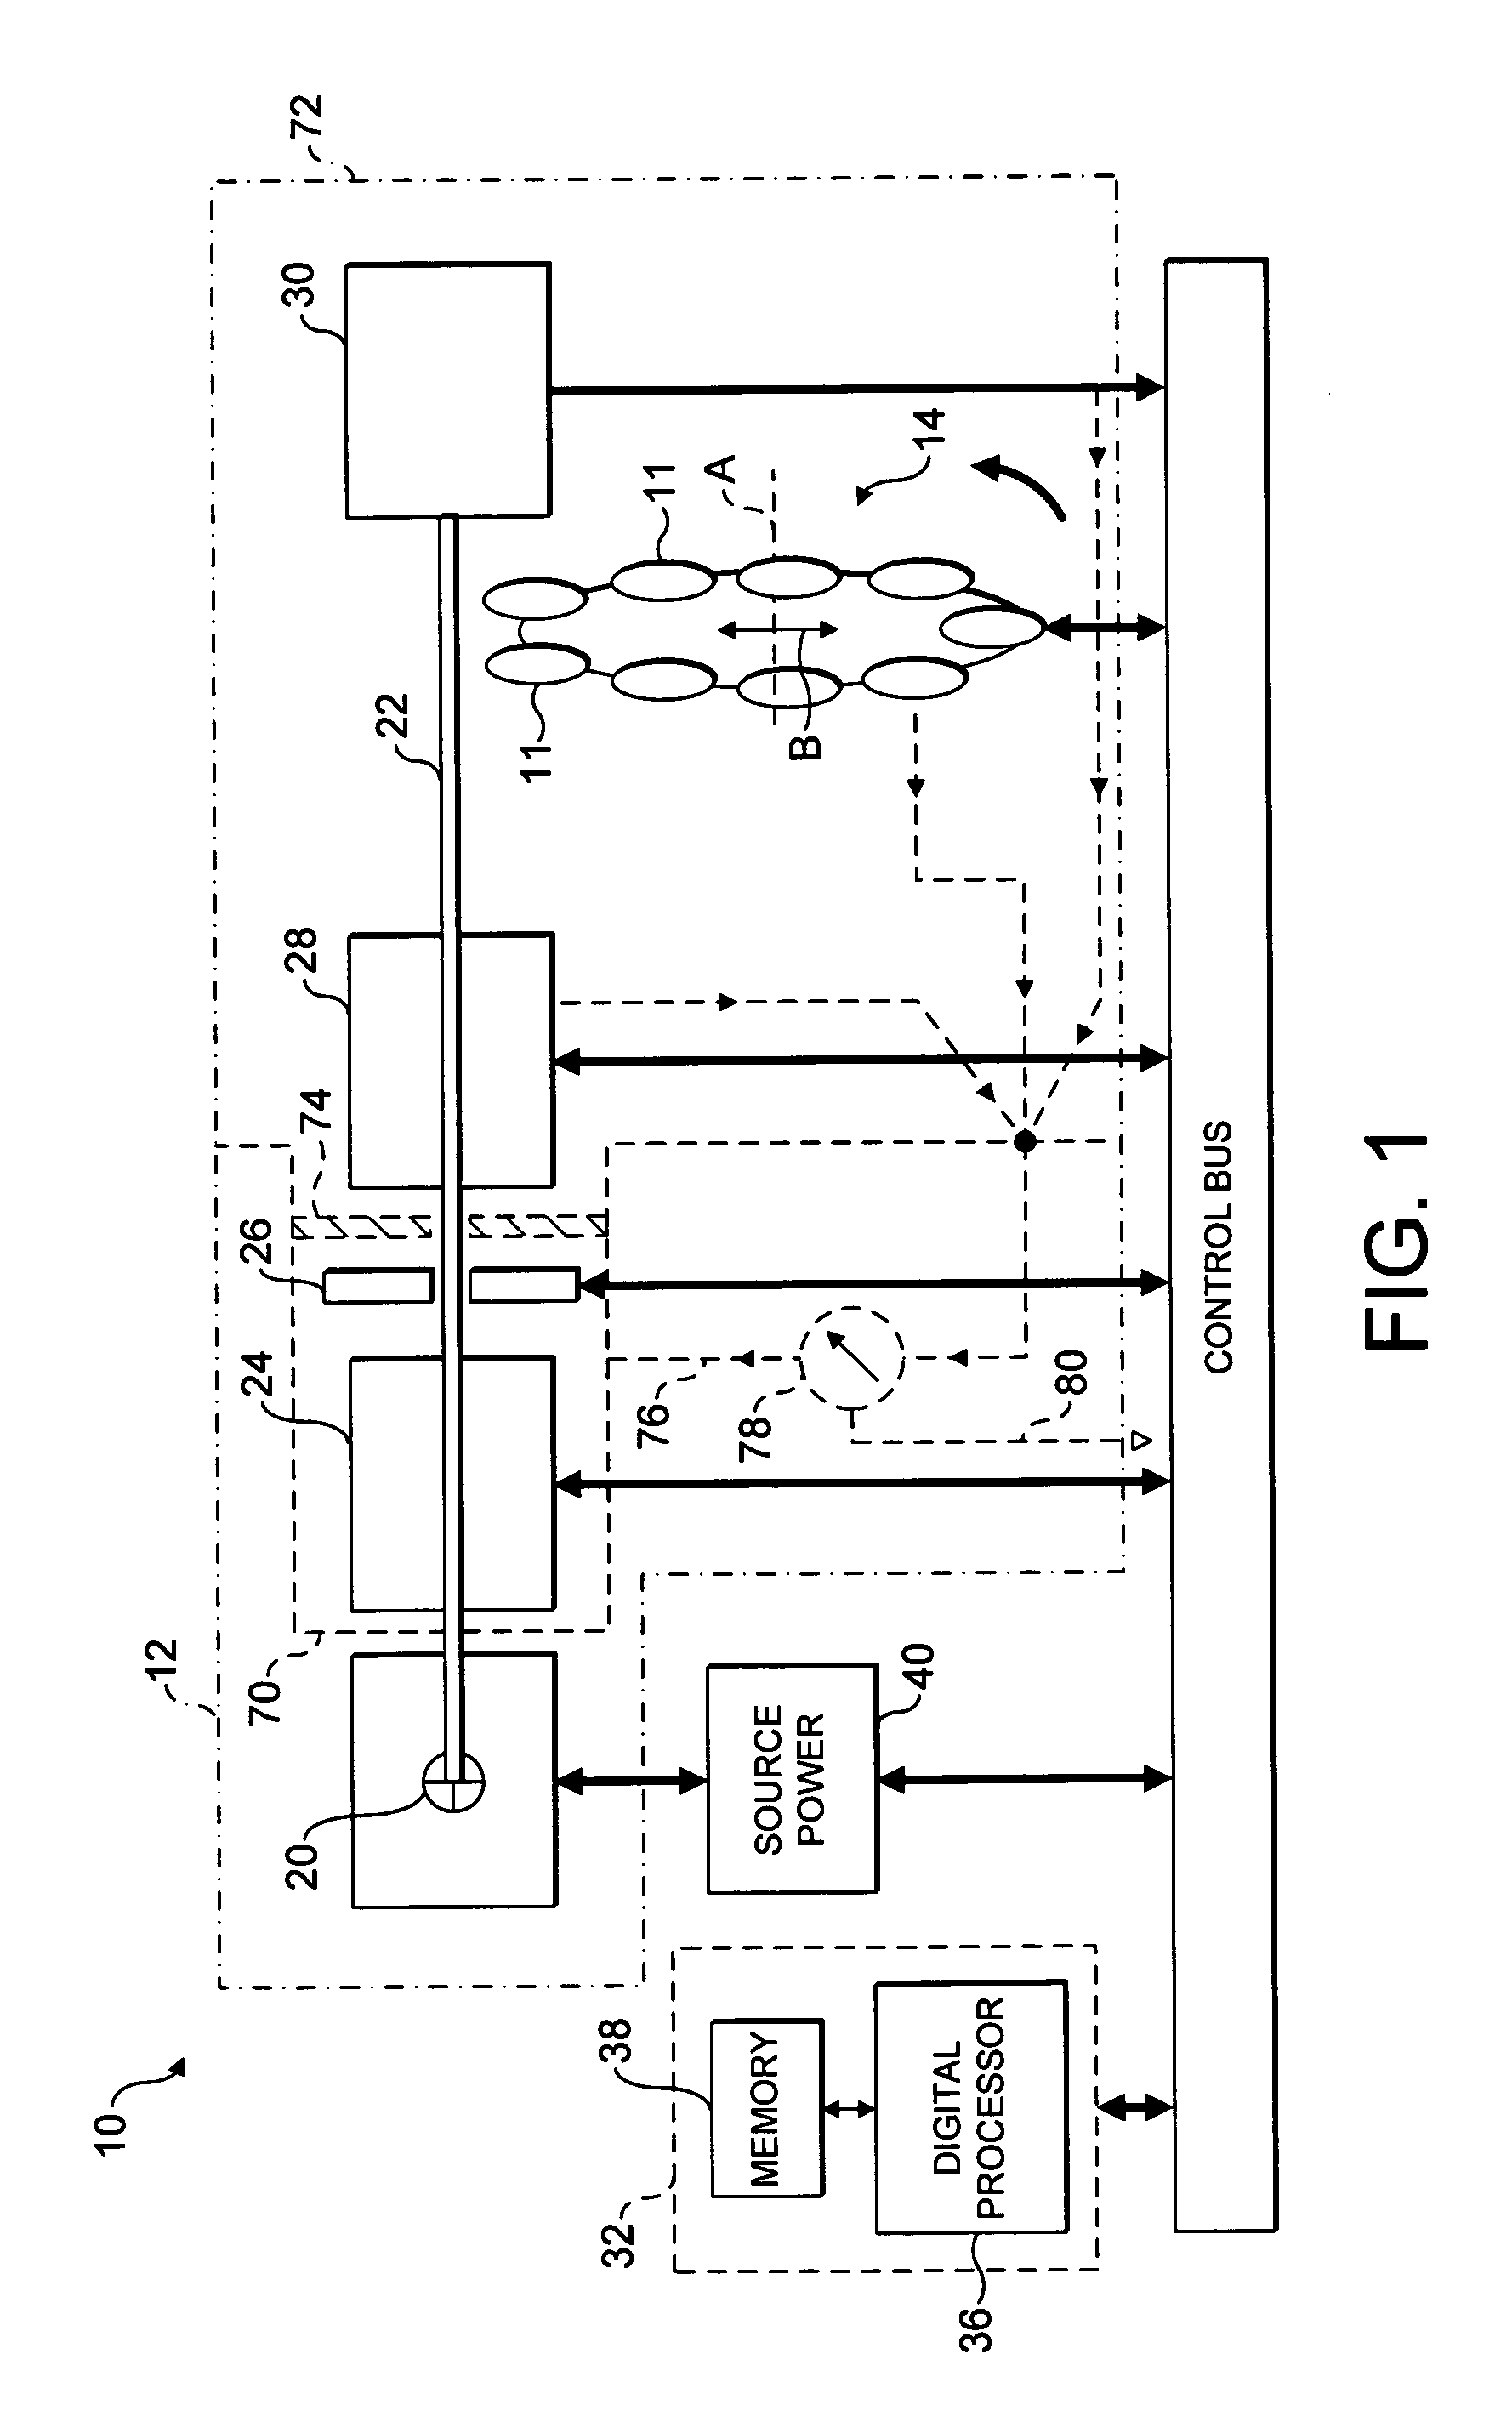 Method of determining dose uniformity of a scanning ion implanter